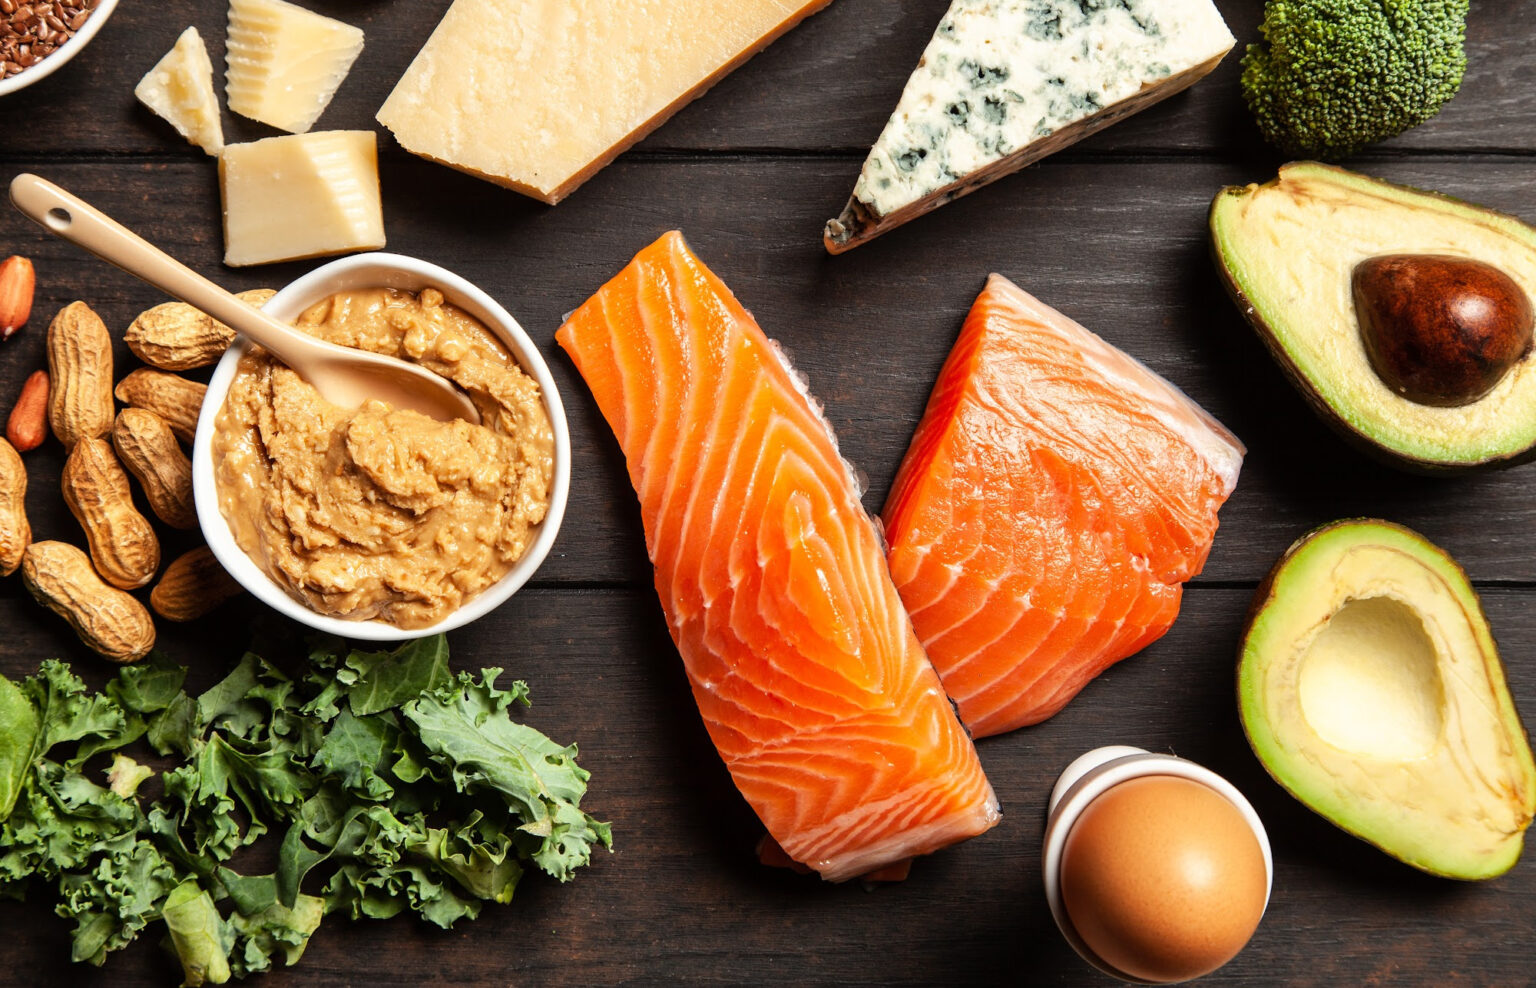 Fish, avocados, peanuts, an egg, cheese, and other healthy foods on a table.